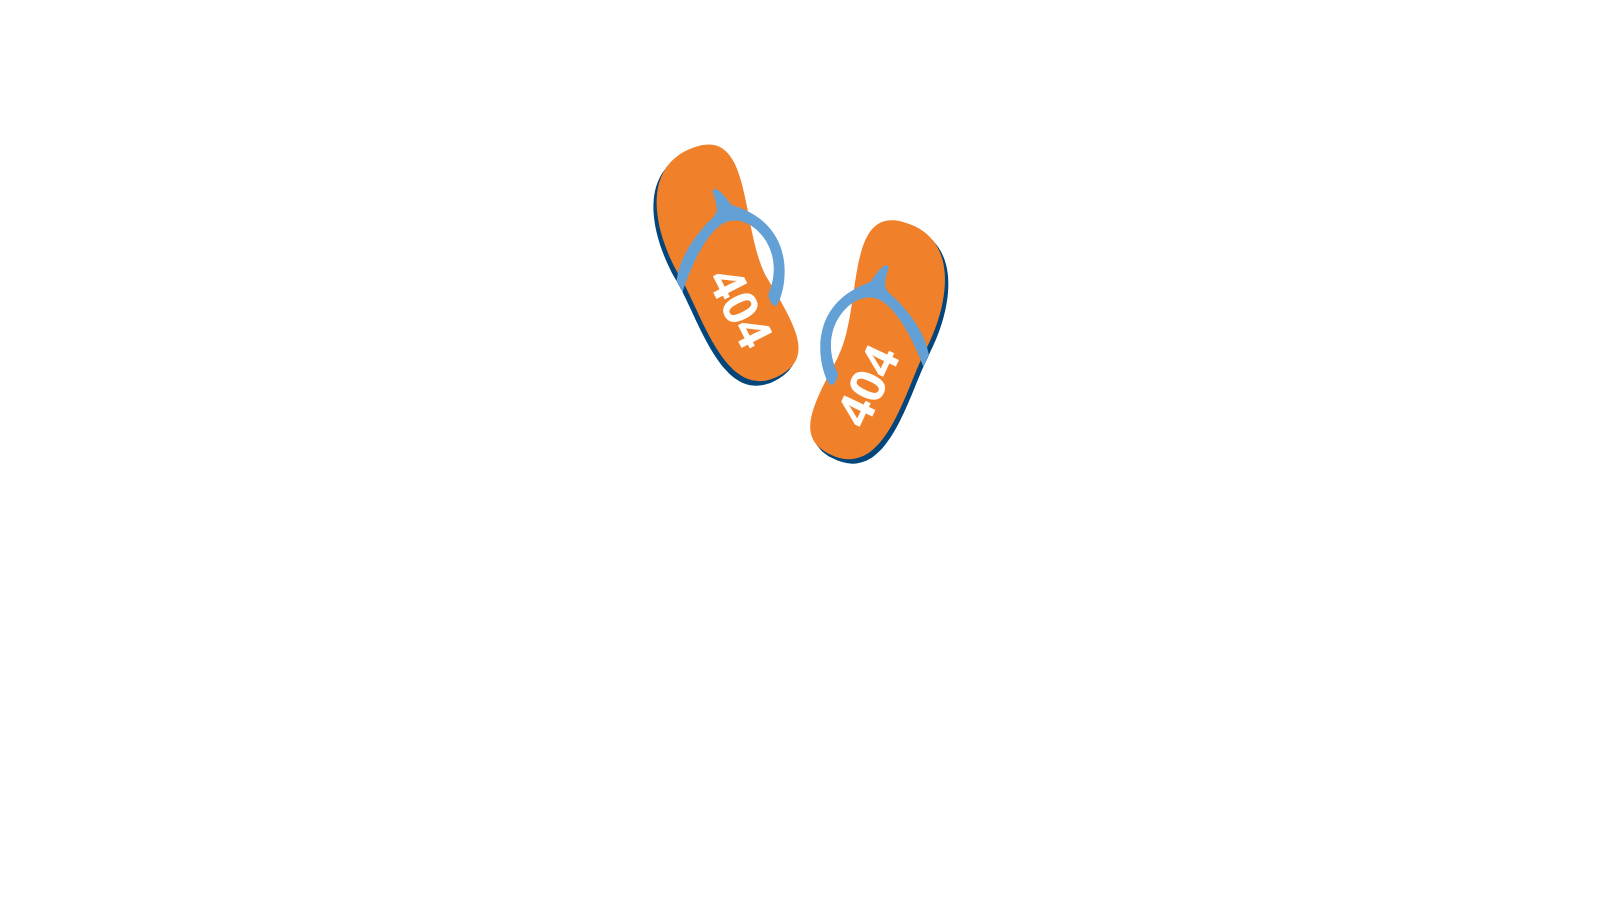 We're sorry the page you are looking for is at the beach.